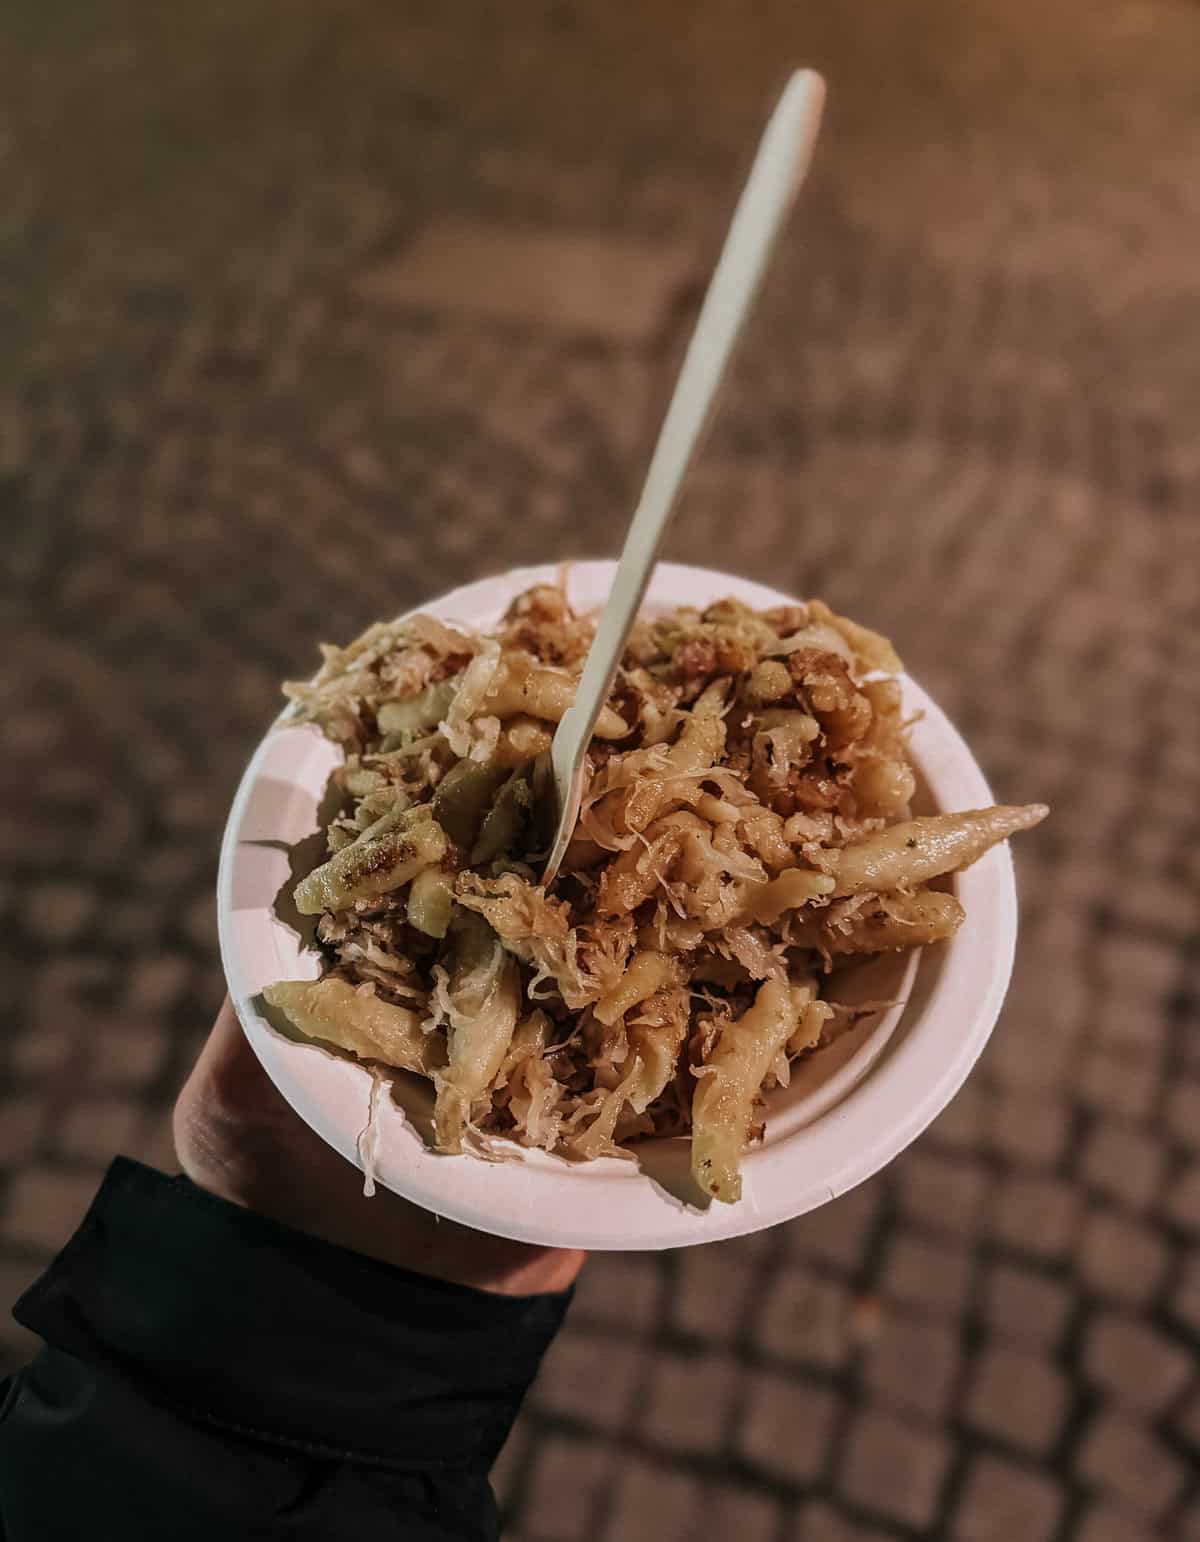 A hand holding a plate filled with Schupfnudeln mixed with sauerkraut and sprinkled with crispy bacon bits, served at a night market.